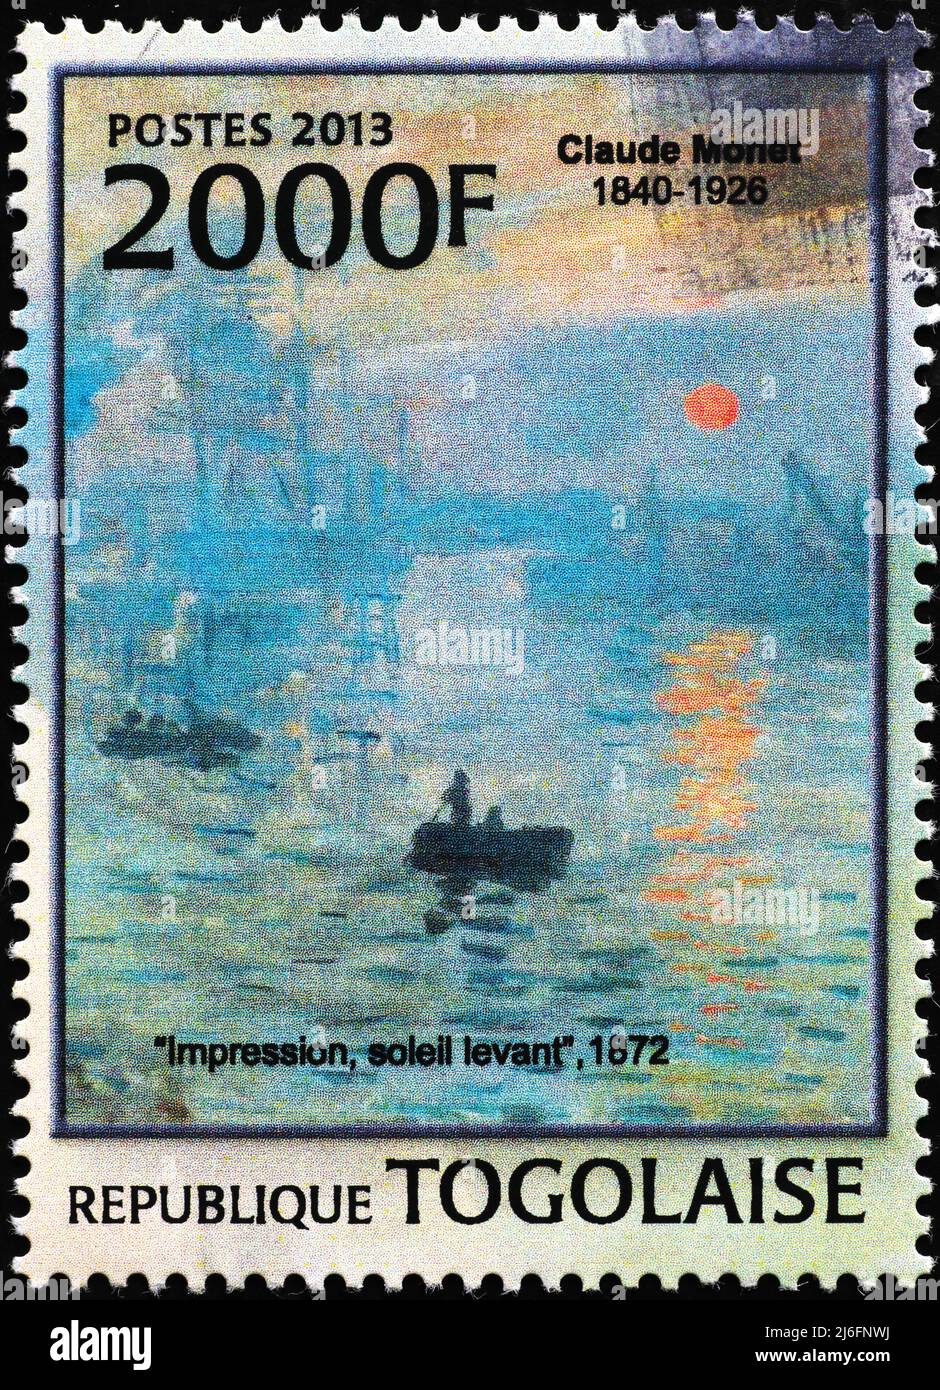 Famous painting by Claude Monet on postage stamp from Togo Stock Photo